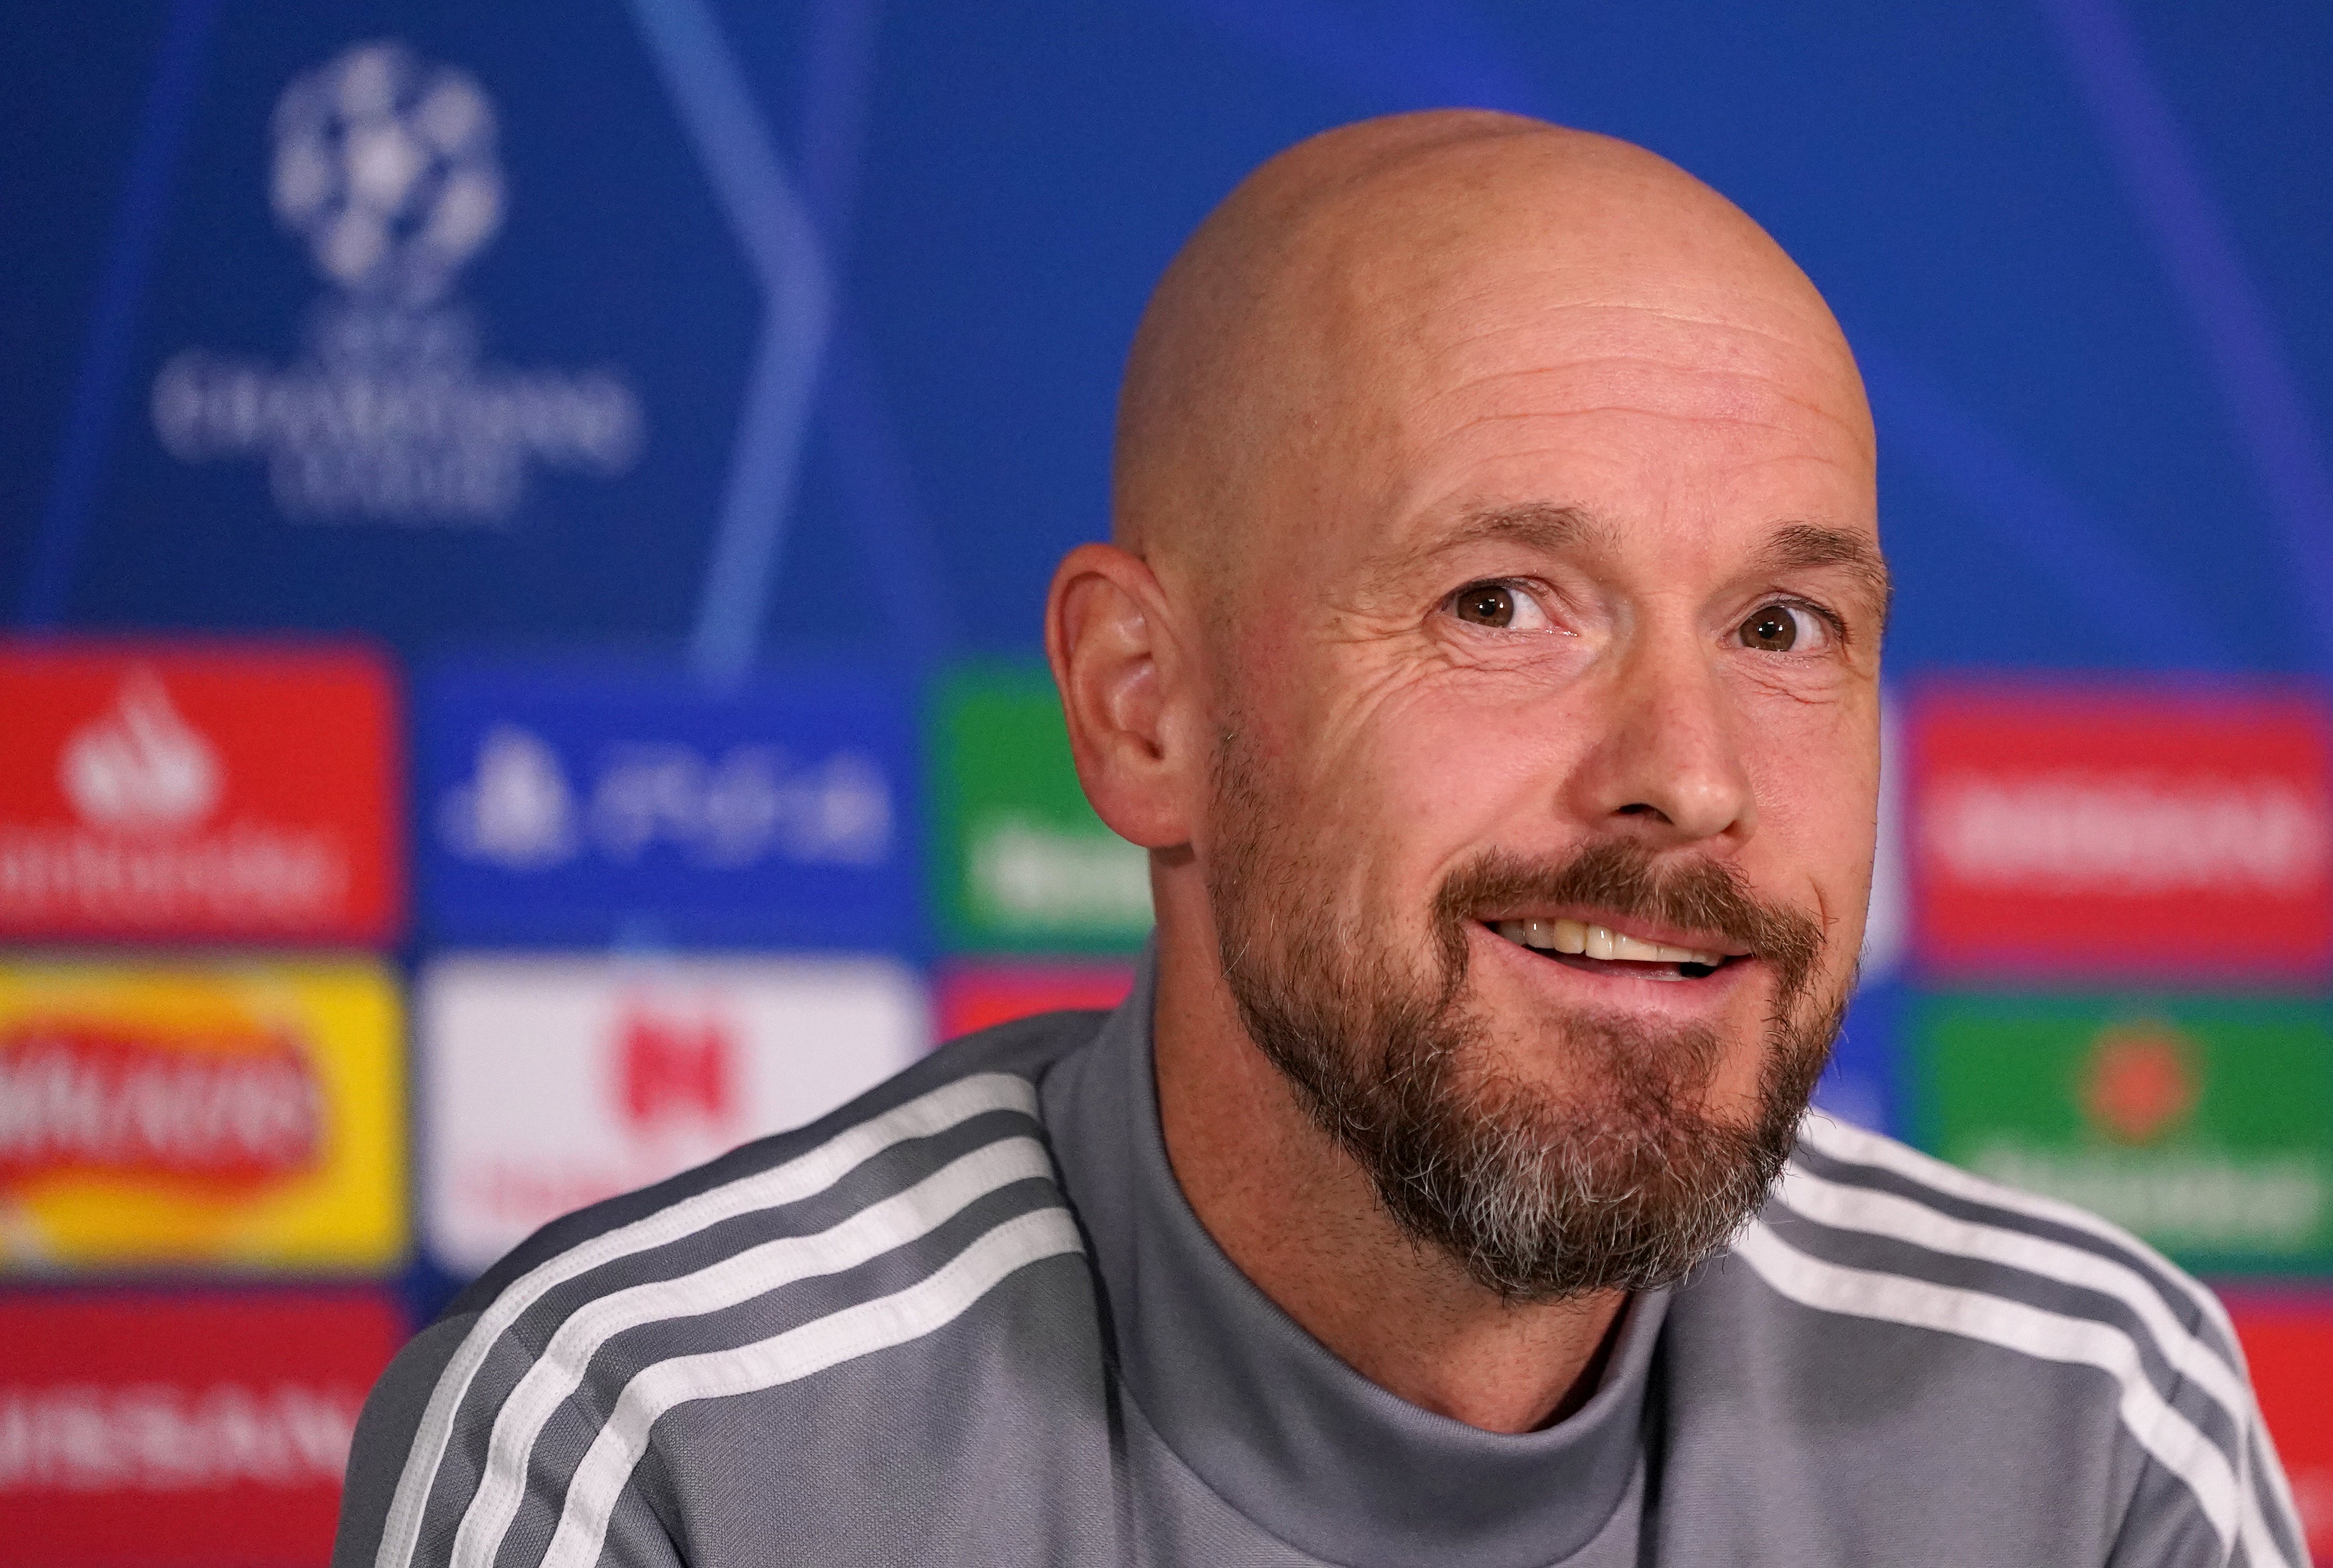 Ajax boss Erik ten Hag is reported to be ready to succeed Ole Gunnar Solskjaer at Manchester United (Tess Derry/PA)